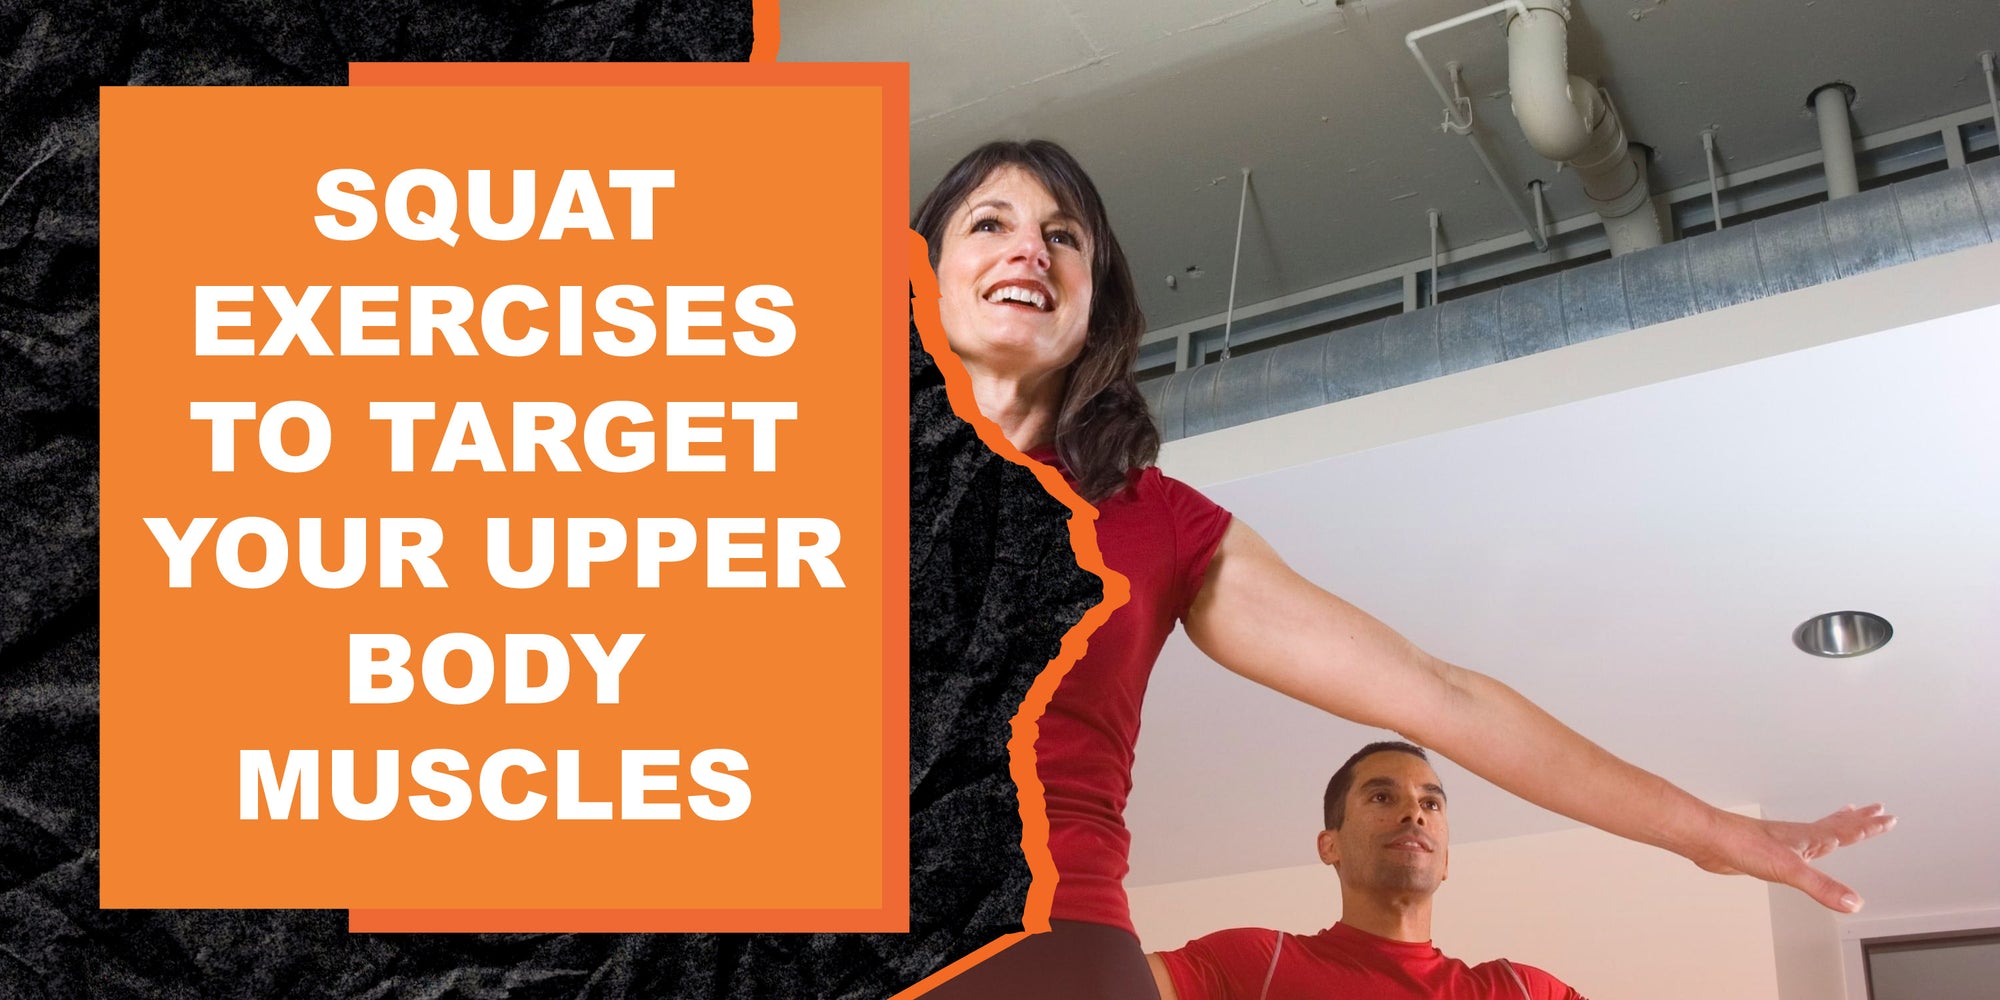 Squat Exercises to Target Your Upper Body Muscles